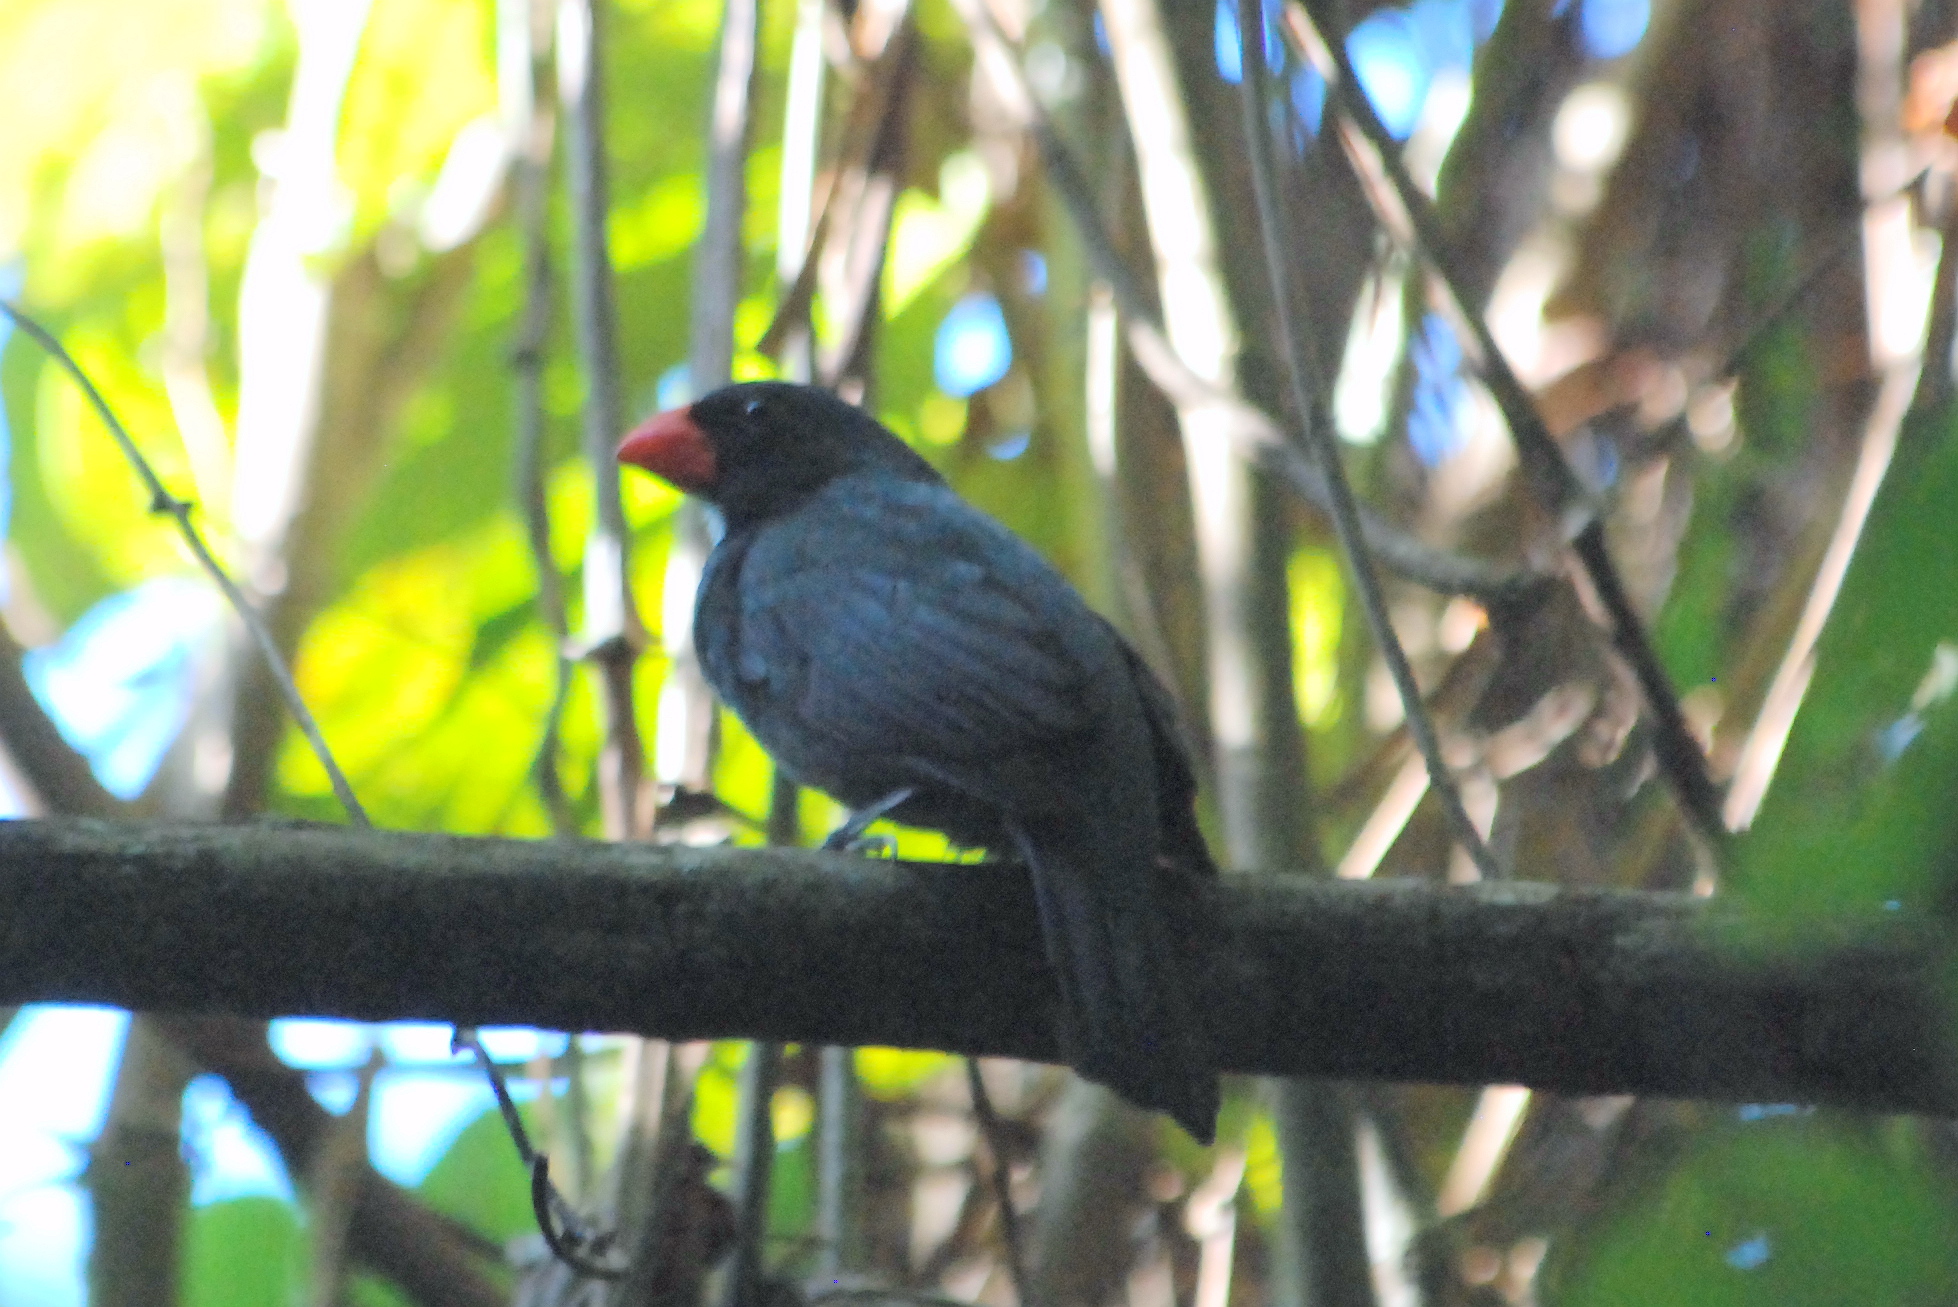 Click picture to see more Slate-colored Grosbeaks.